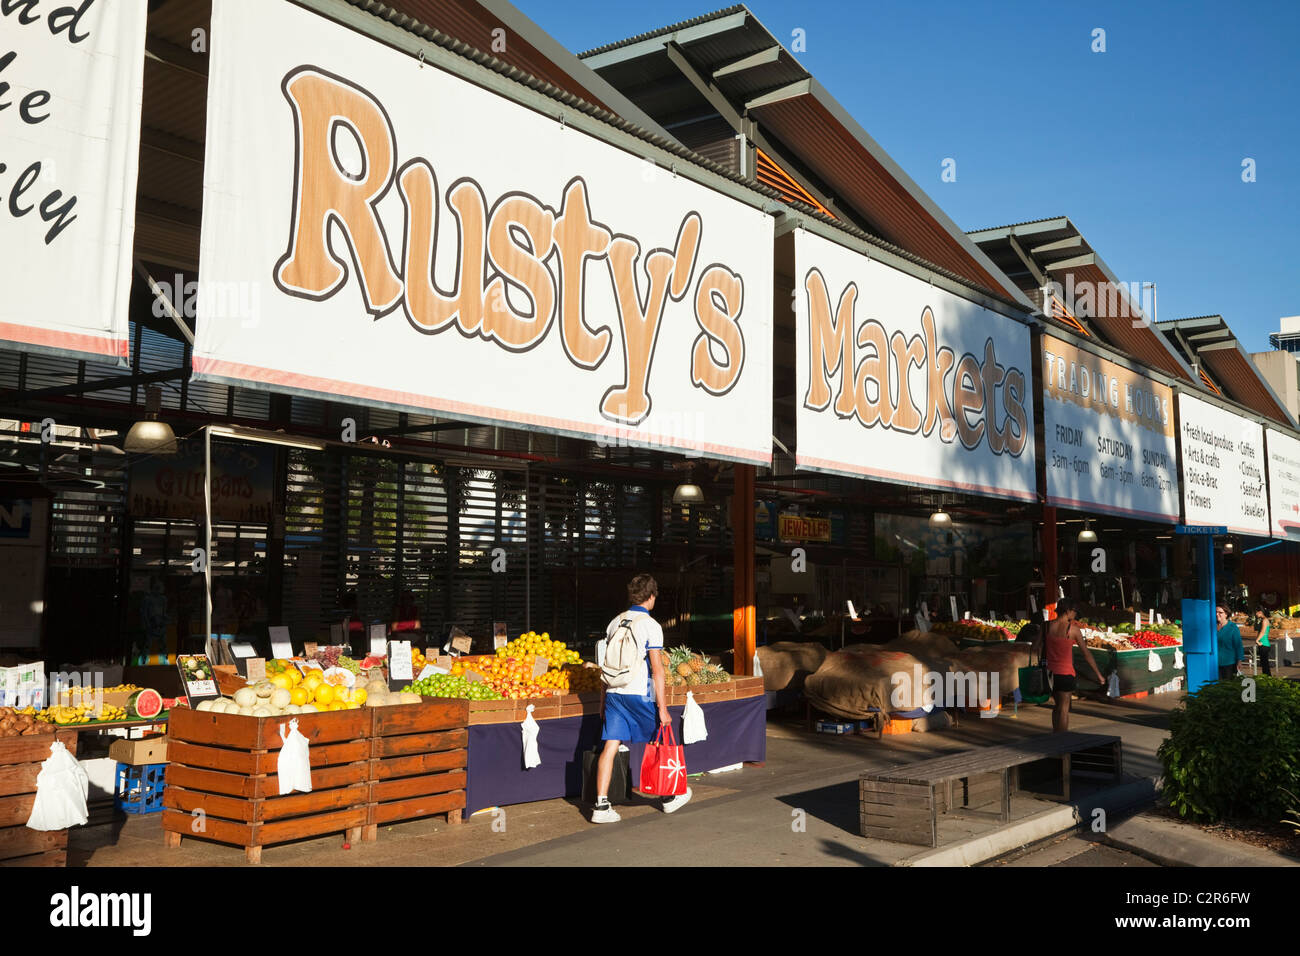 Rusty's Markets - local fruit and vegetable market in the city centre. Cairns, Queensland, Australia Stock Photo